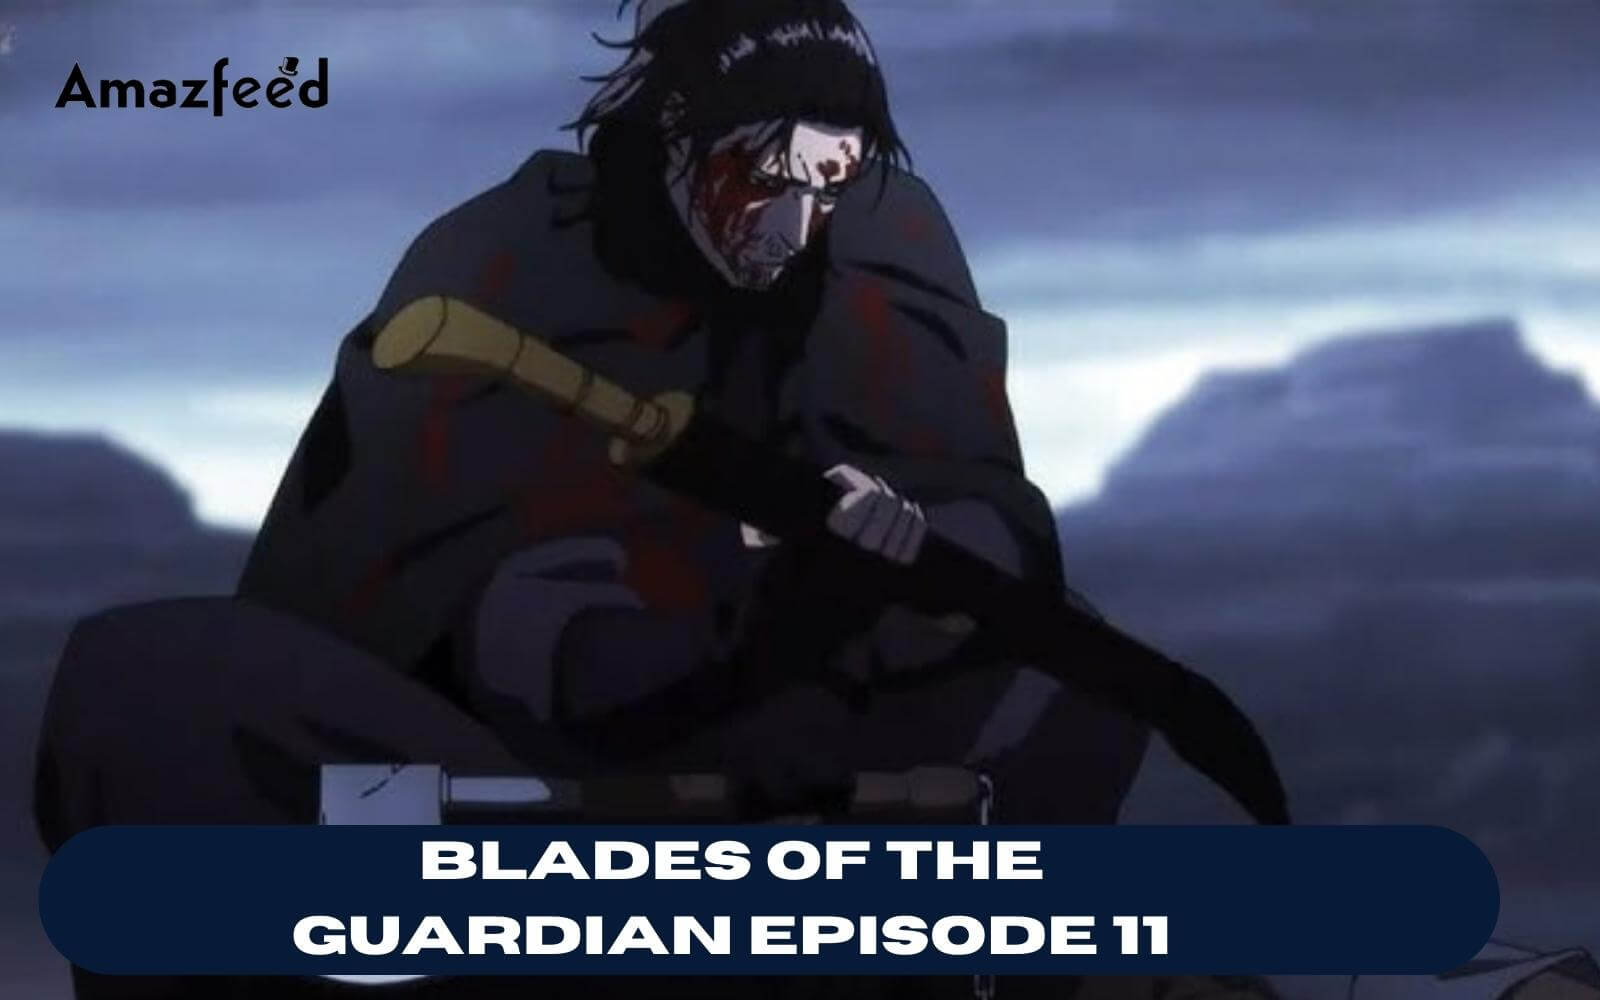 Blades of the Guardians Season 2 Release Date, Cast, Plot and More